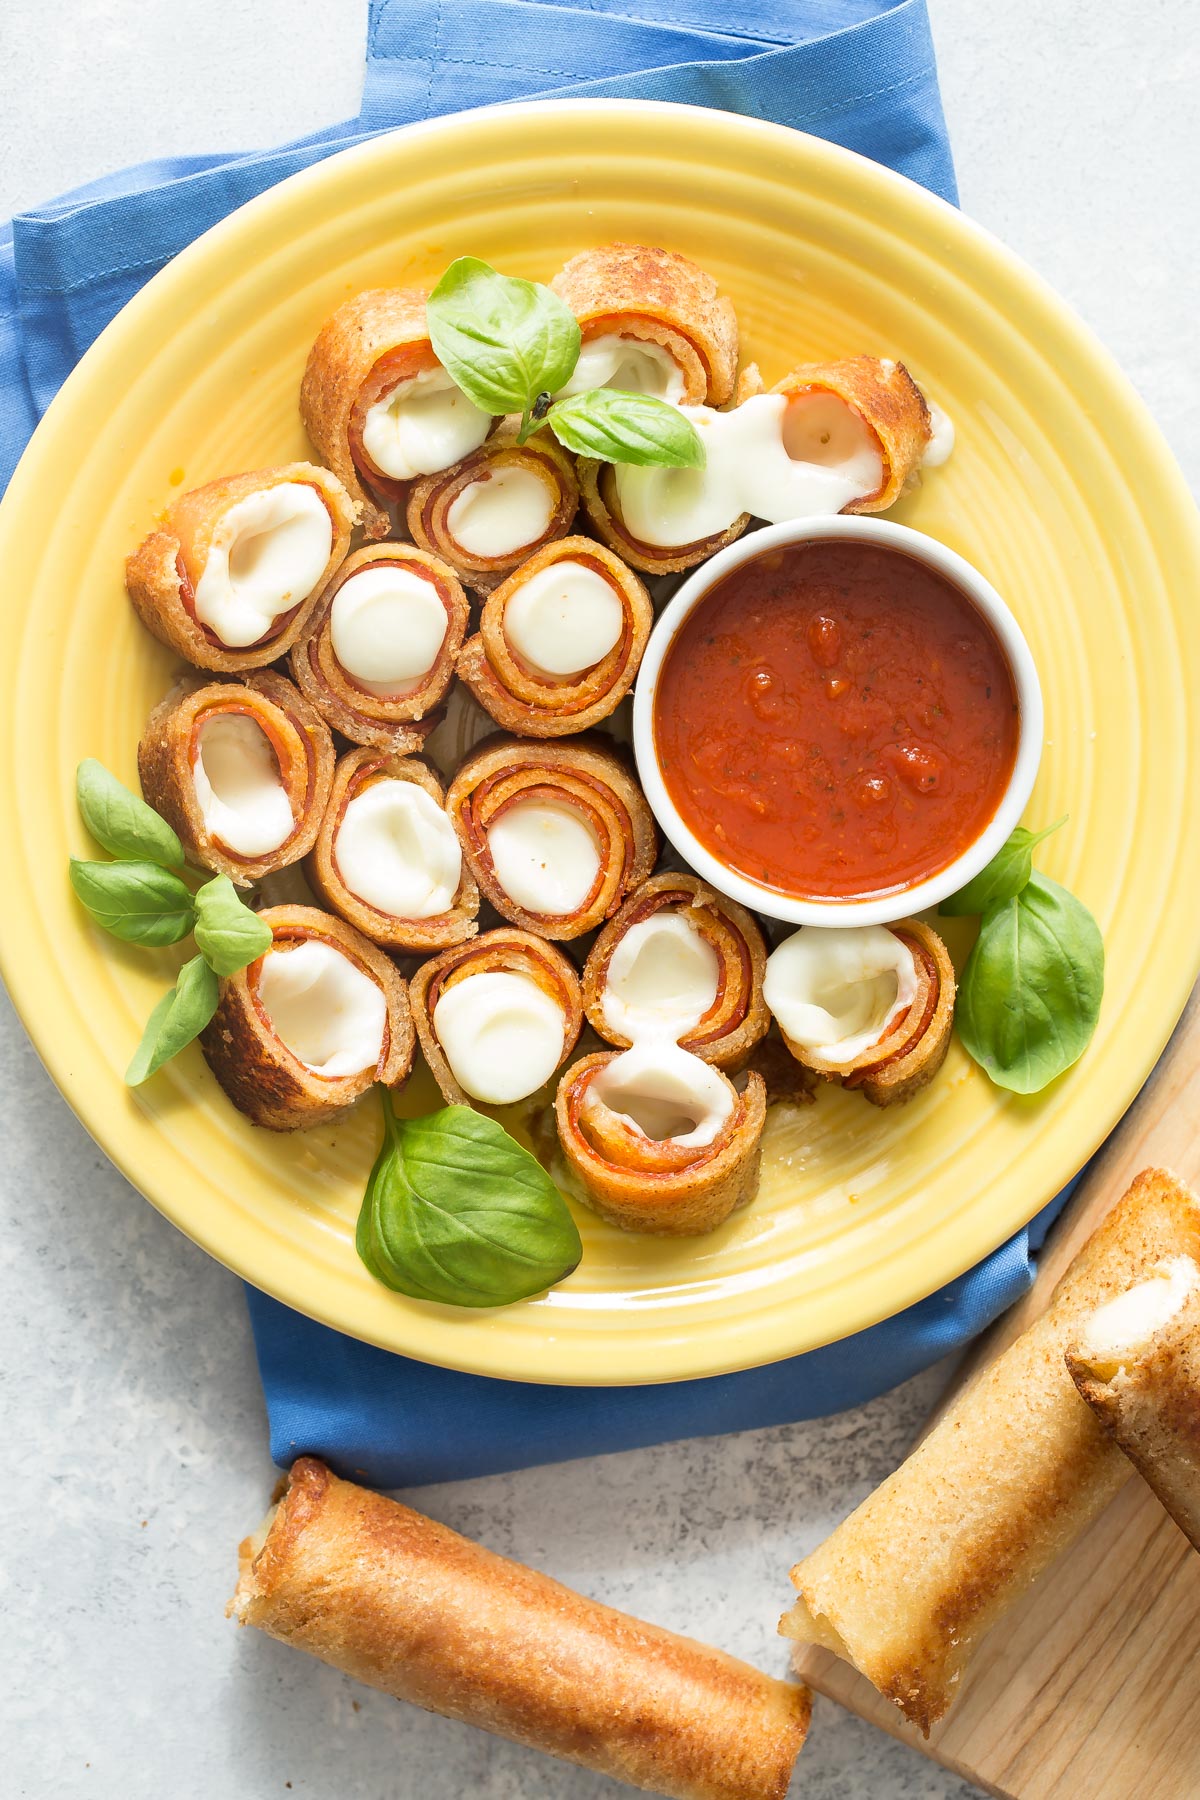 Lunchbox pizza recipes: Grilled Pizza Roll Ups | Weelicious